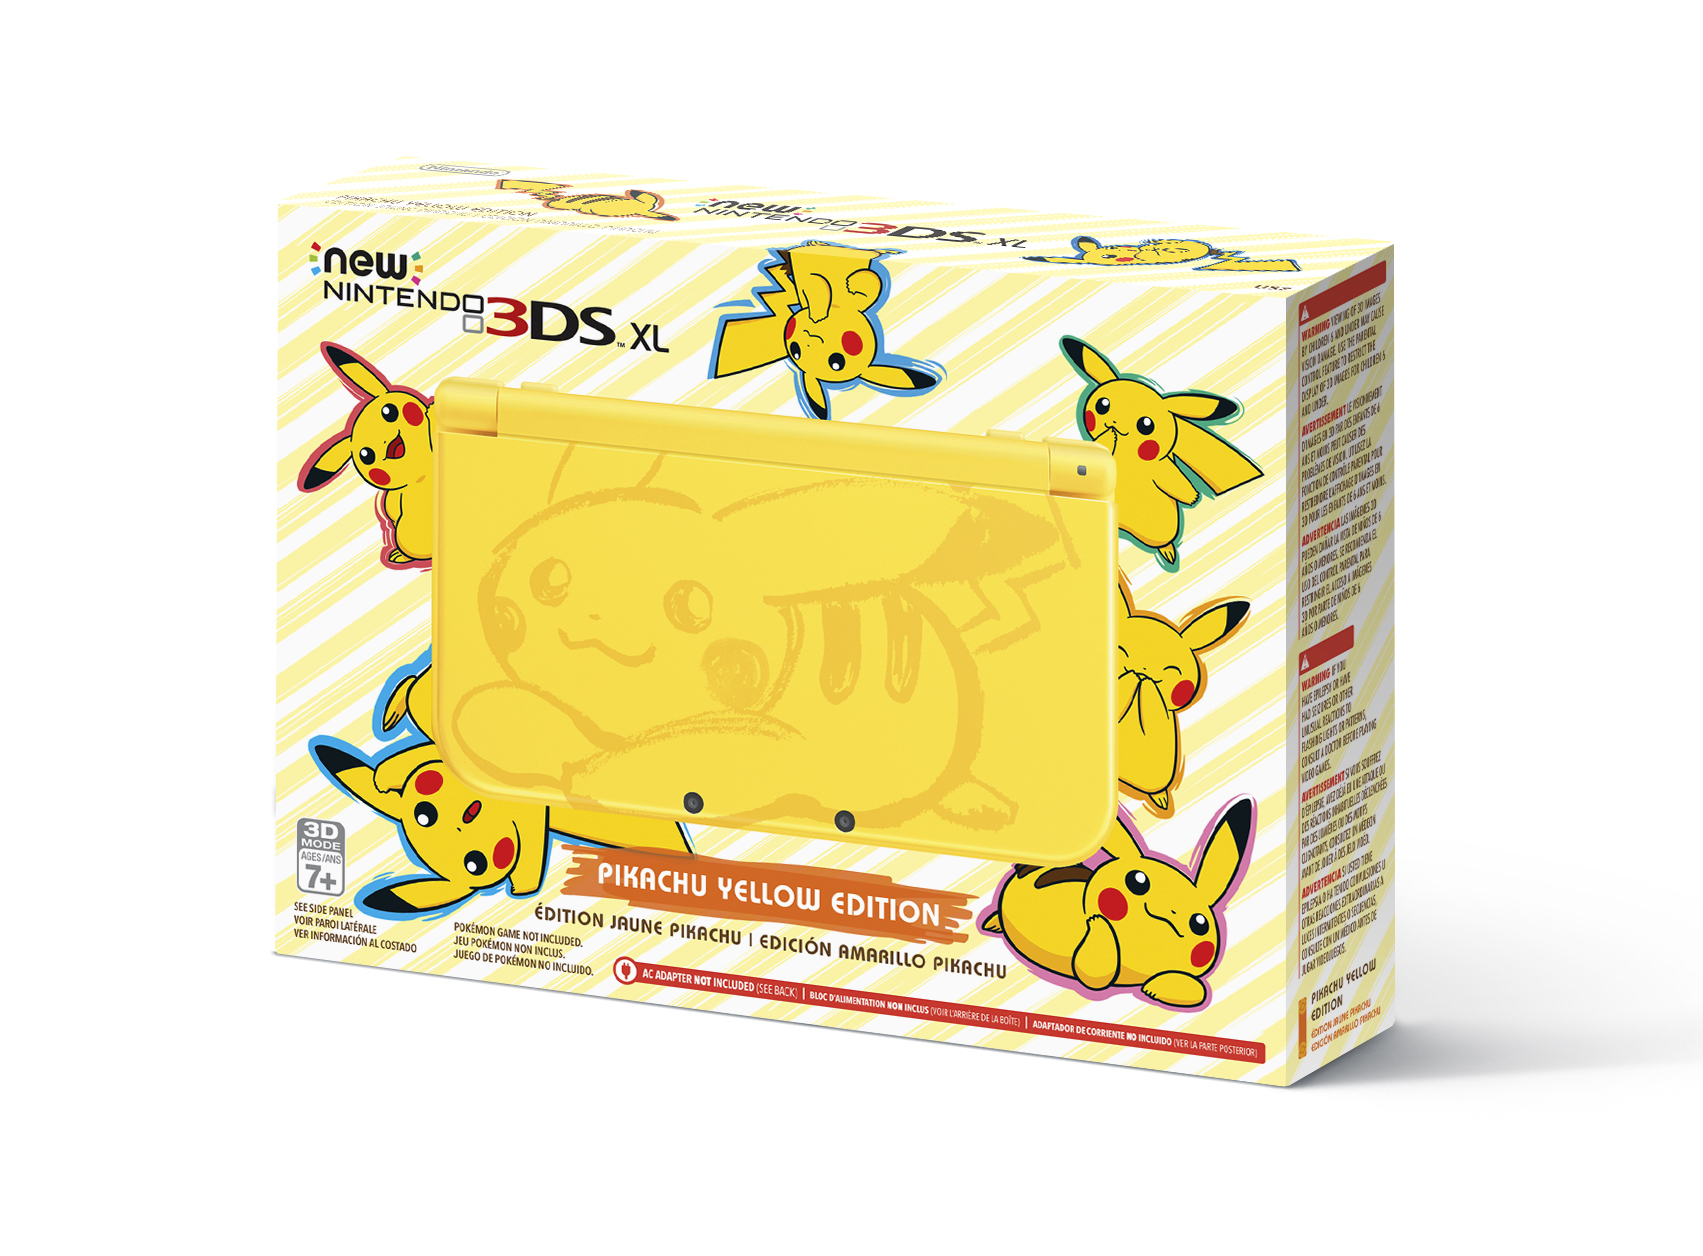 New Nintendo 3DS XL Dimensions & Drawings